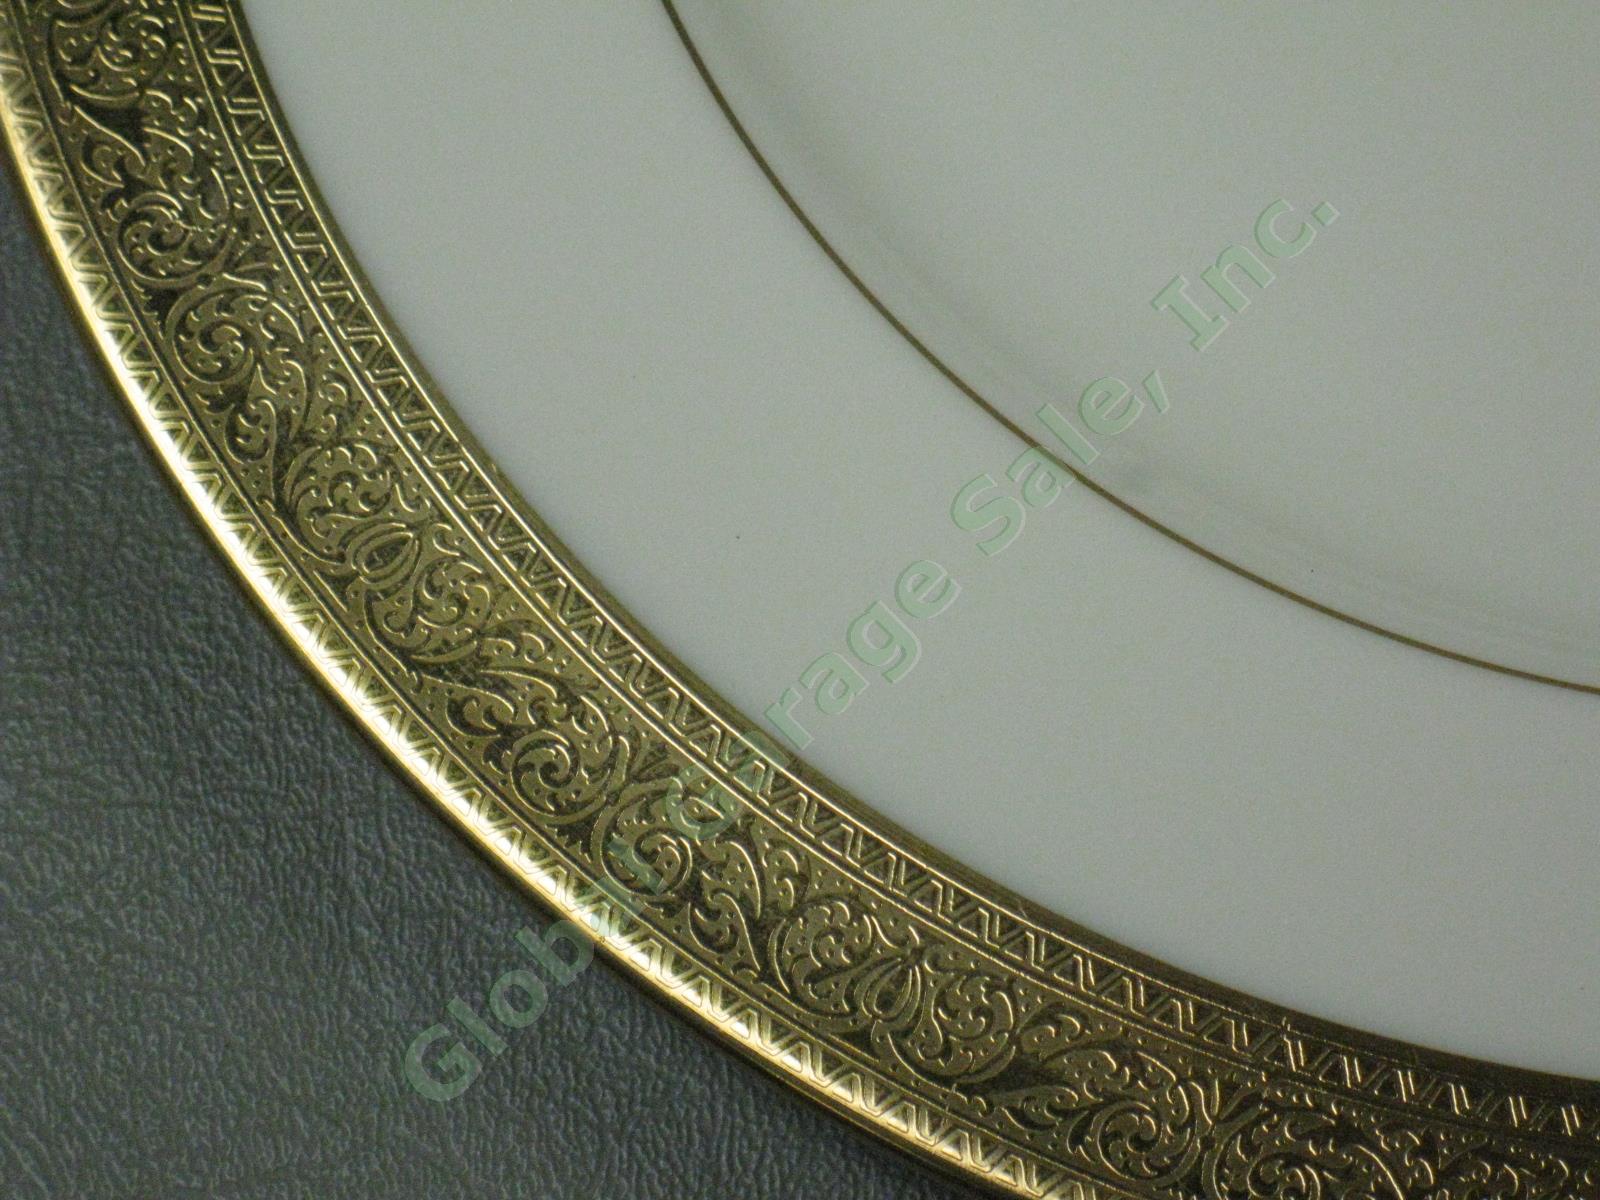 4 Lenox Westchester China M139 Presidential Gold Encrusted 10-1/2" Dinner Plates 2